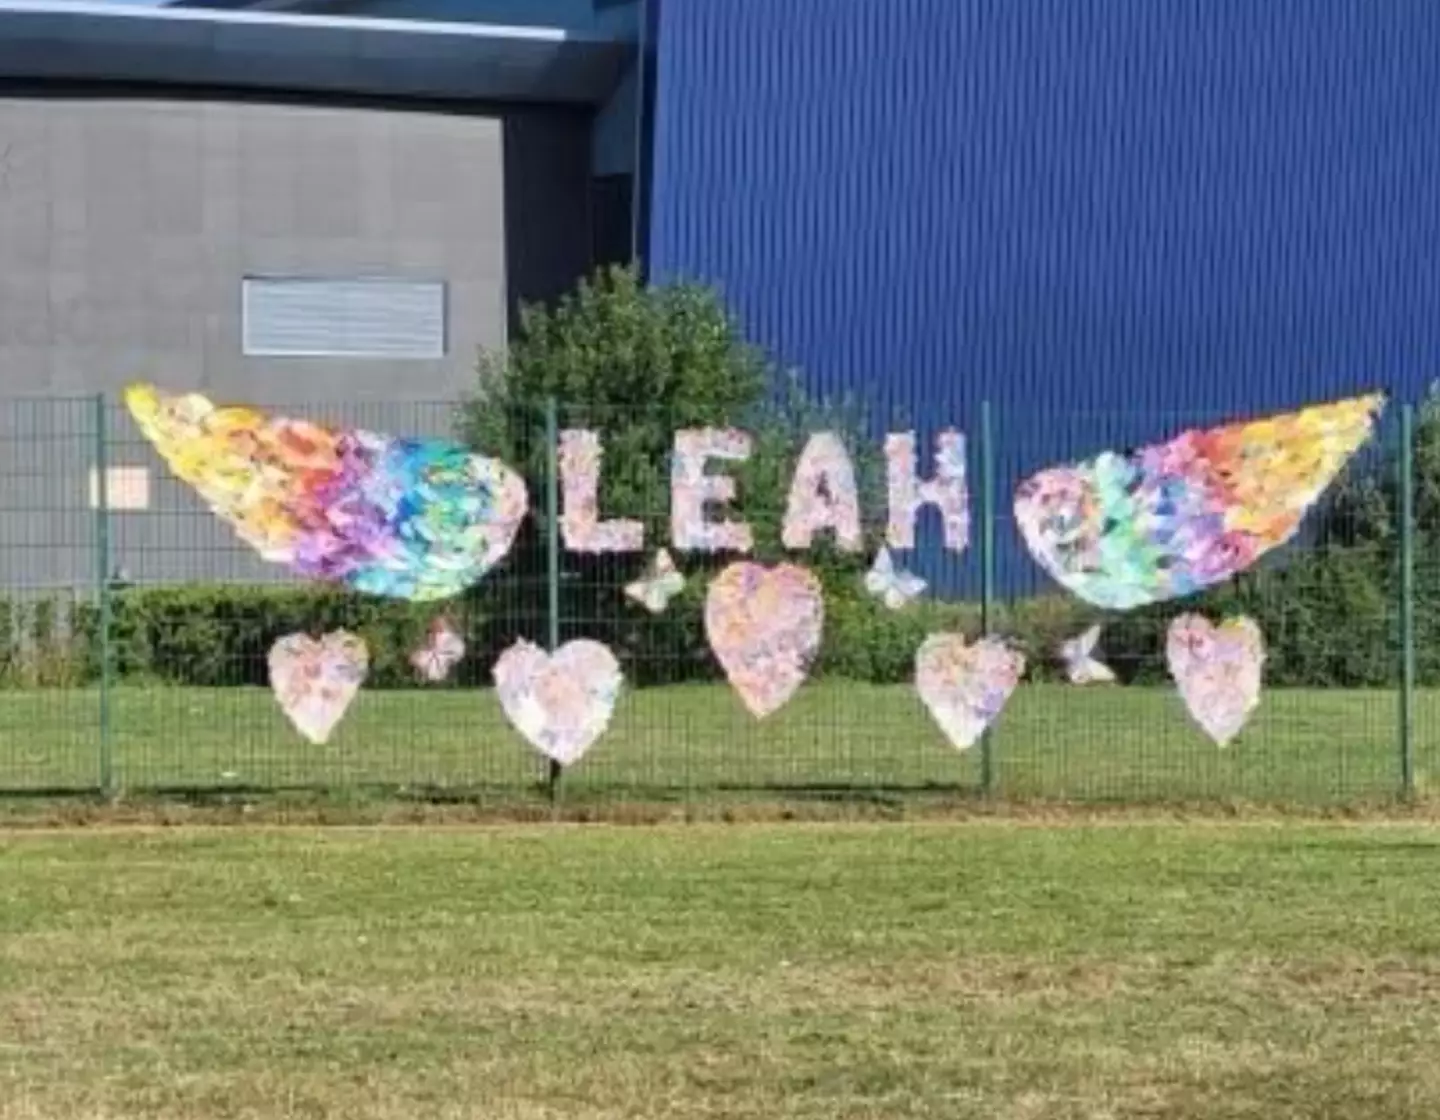 Leah's friends and family have paid tribute to her.